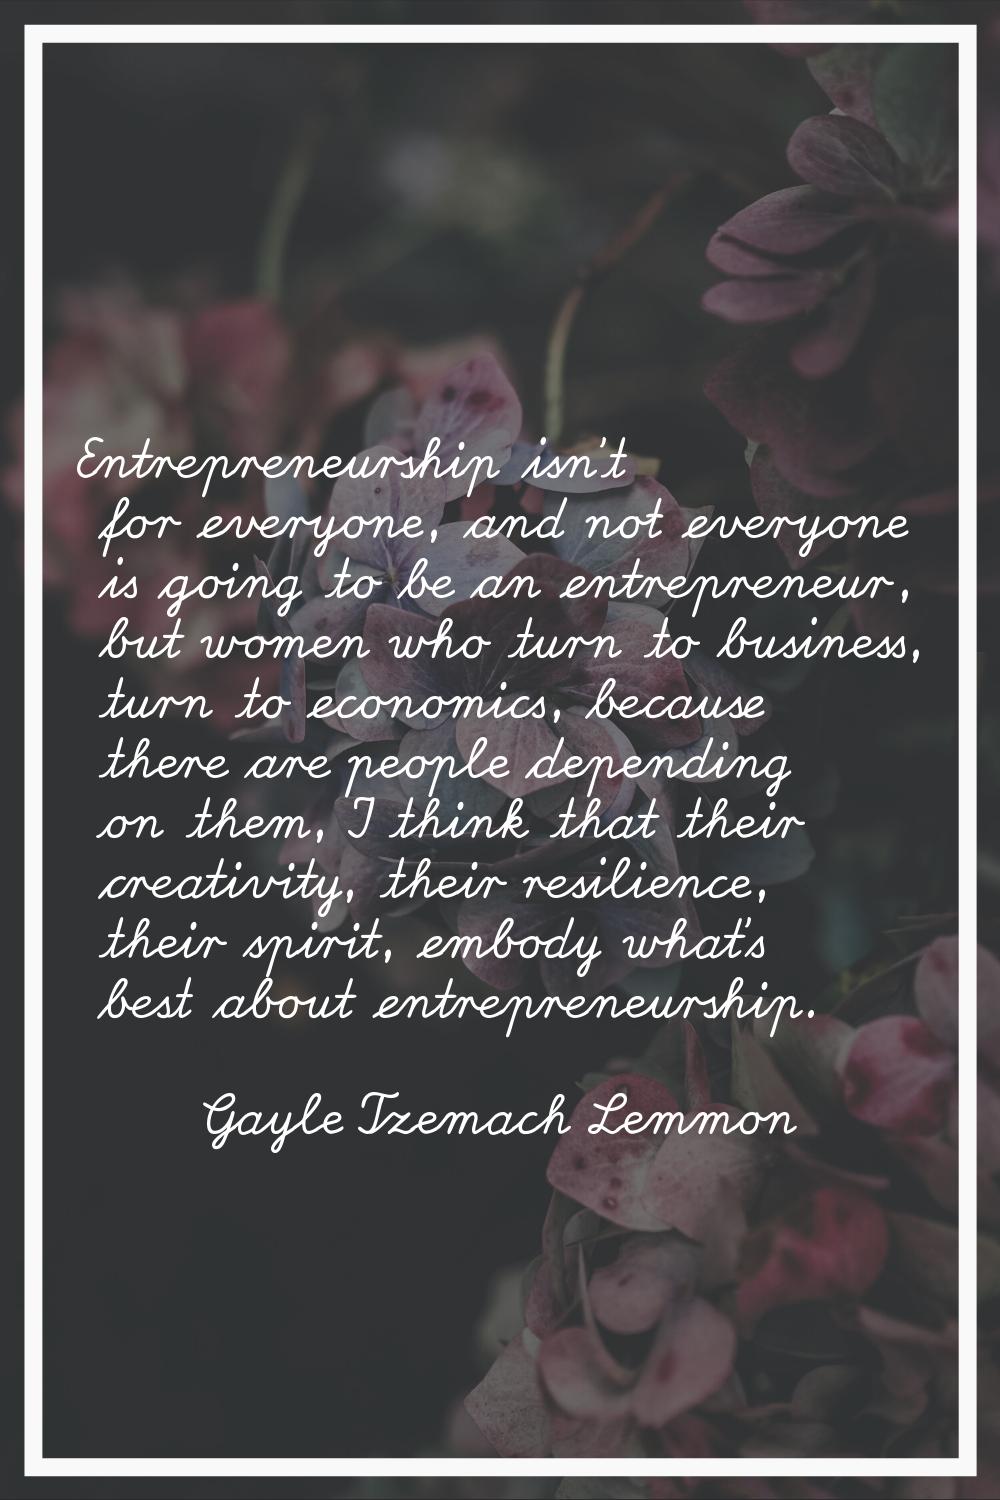 Entrepreneurship isn't for everyone, and not everyone is going to be an entrepreneur, but women who